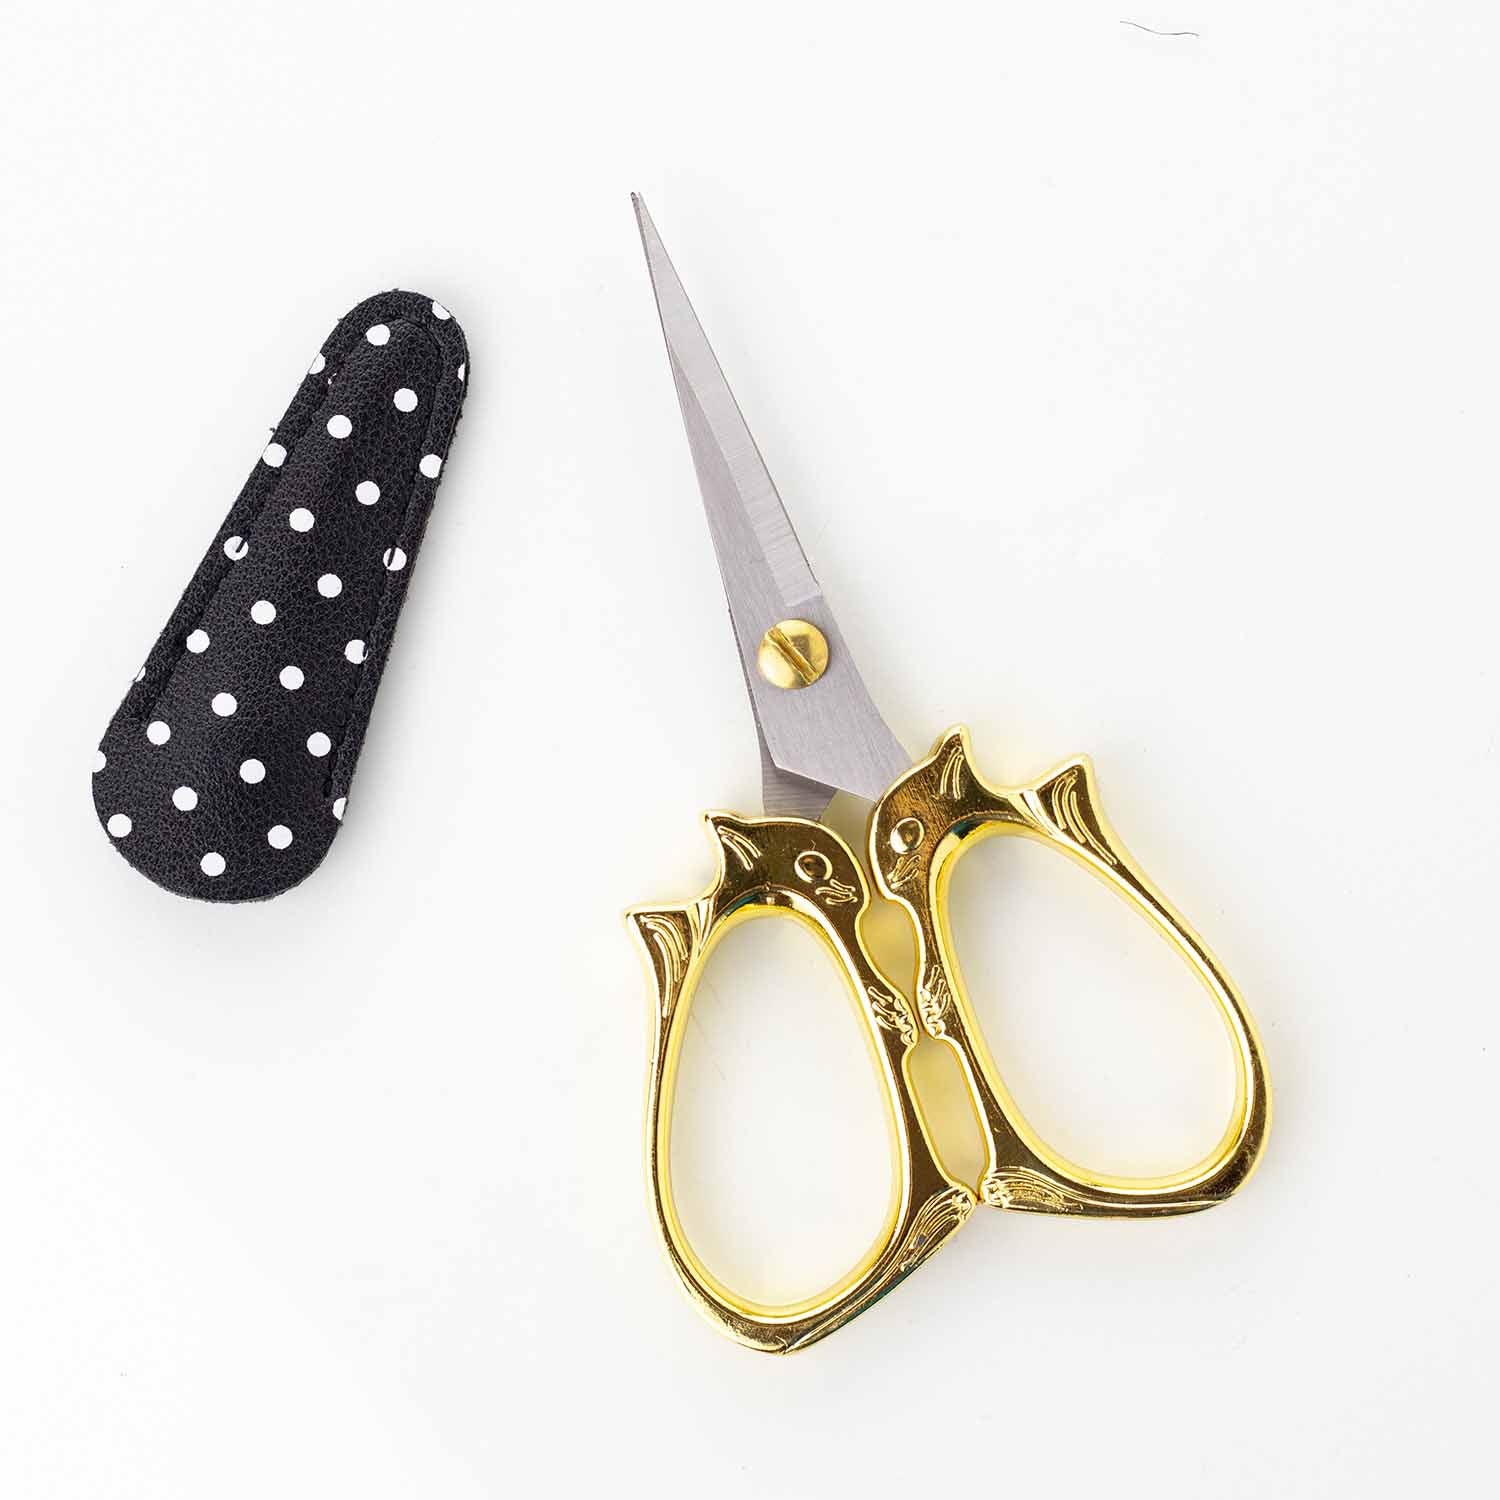 3.5 Multi Purpose Cat Shape Small Embroidery Fancy Scissors Gold Plated